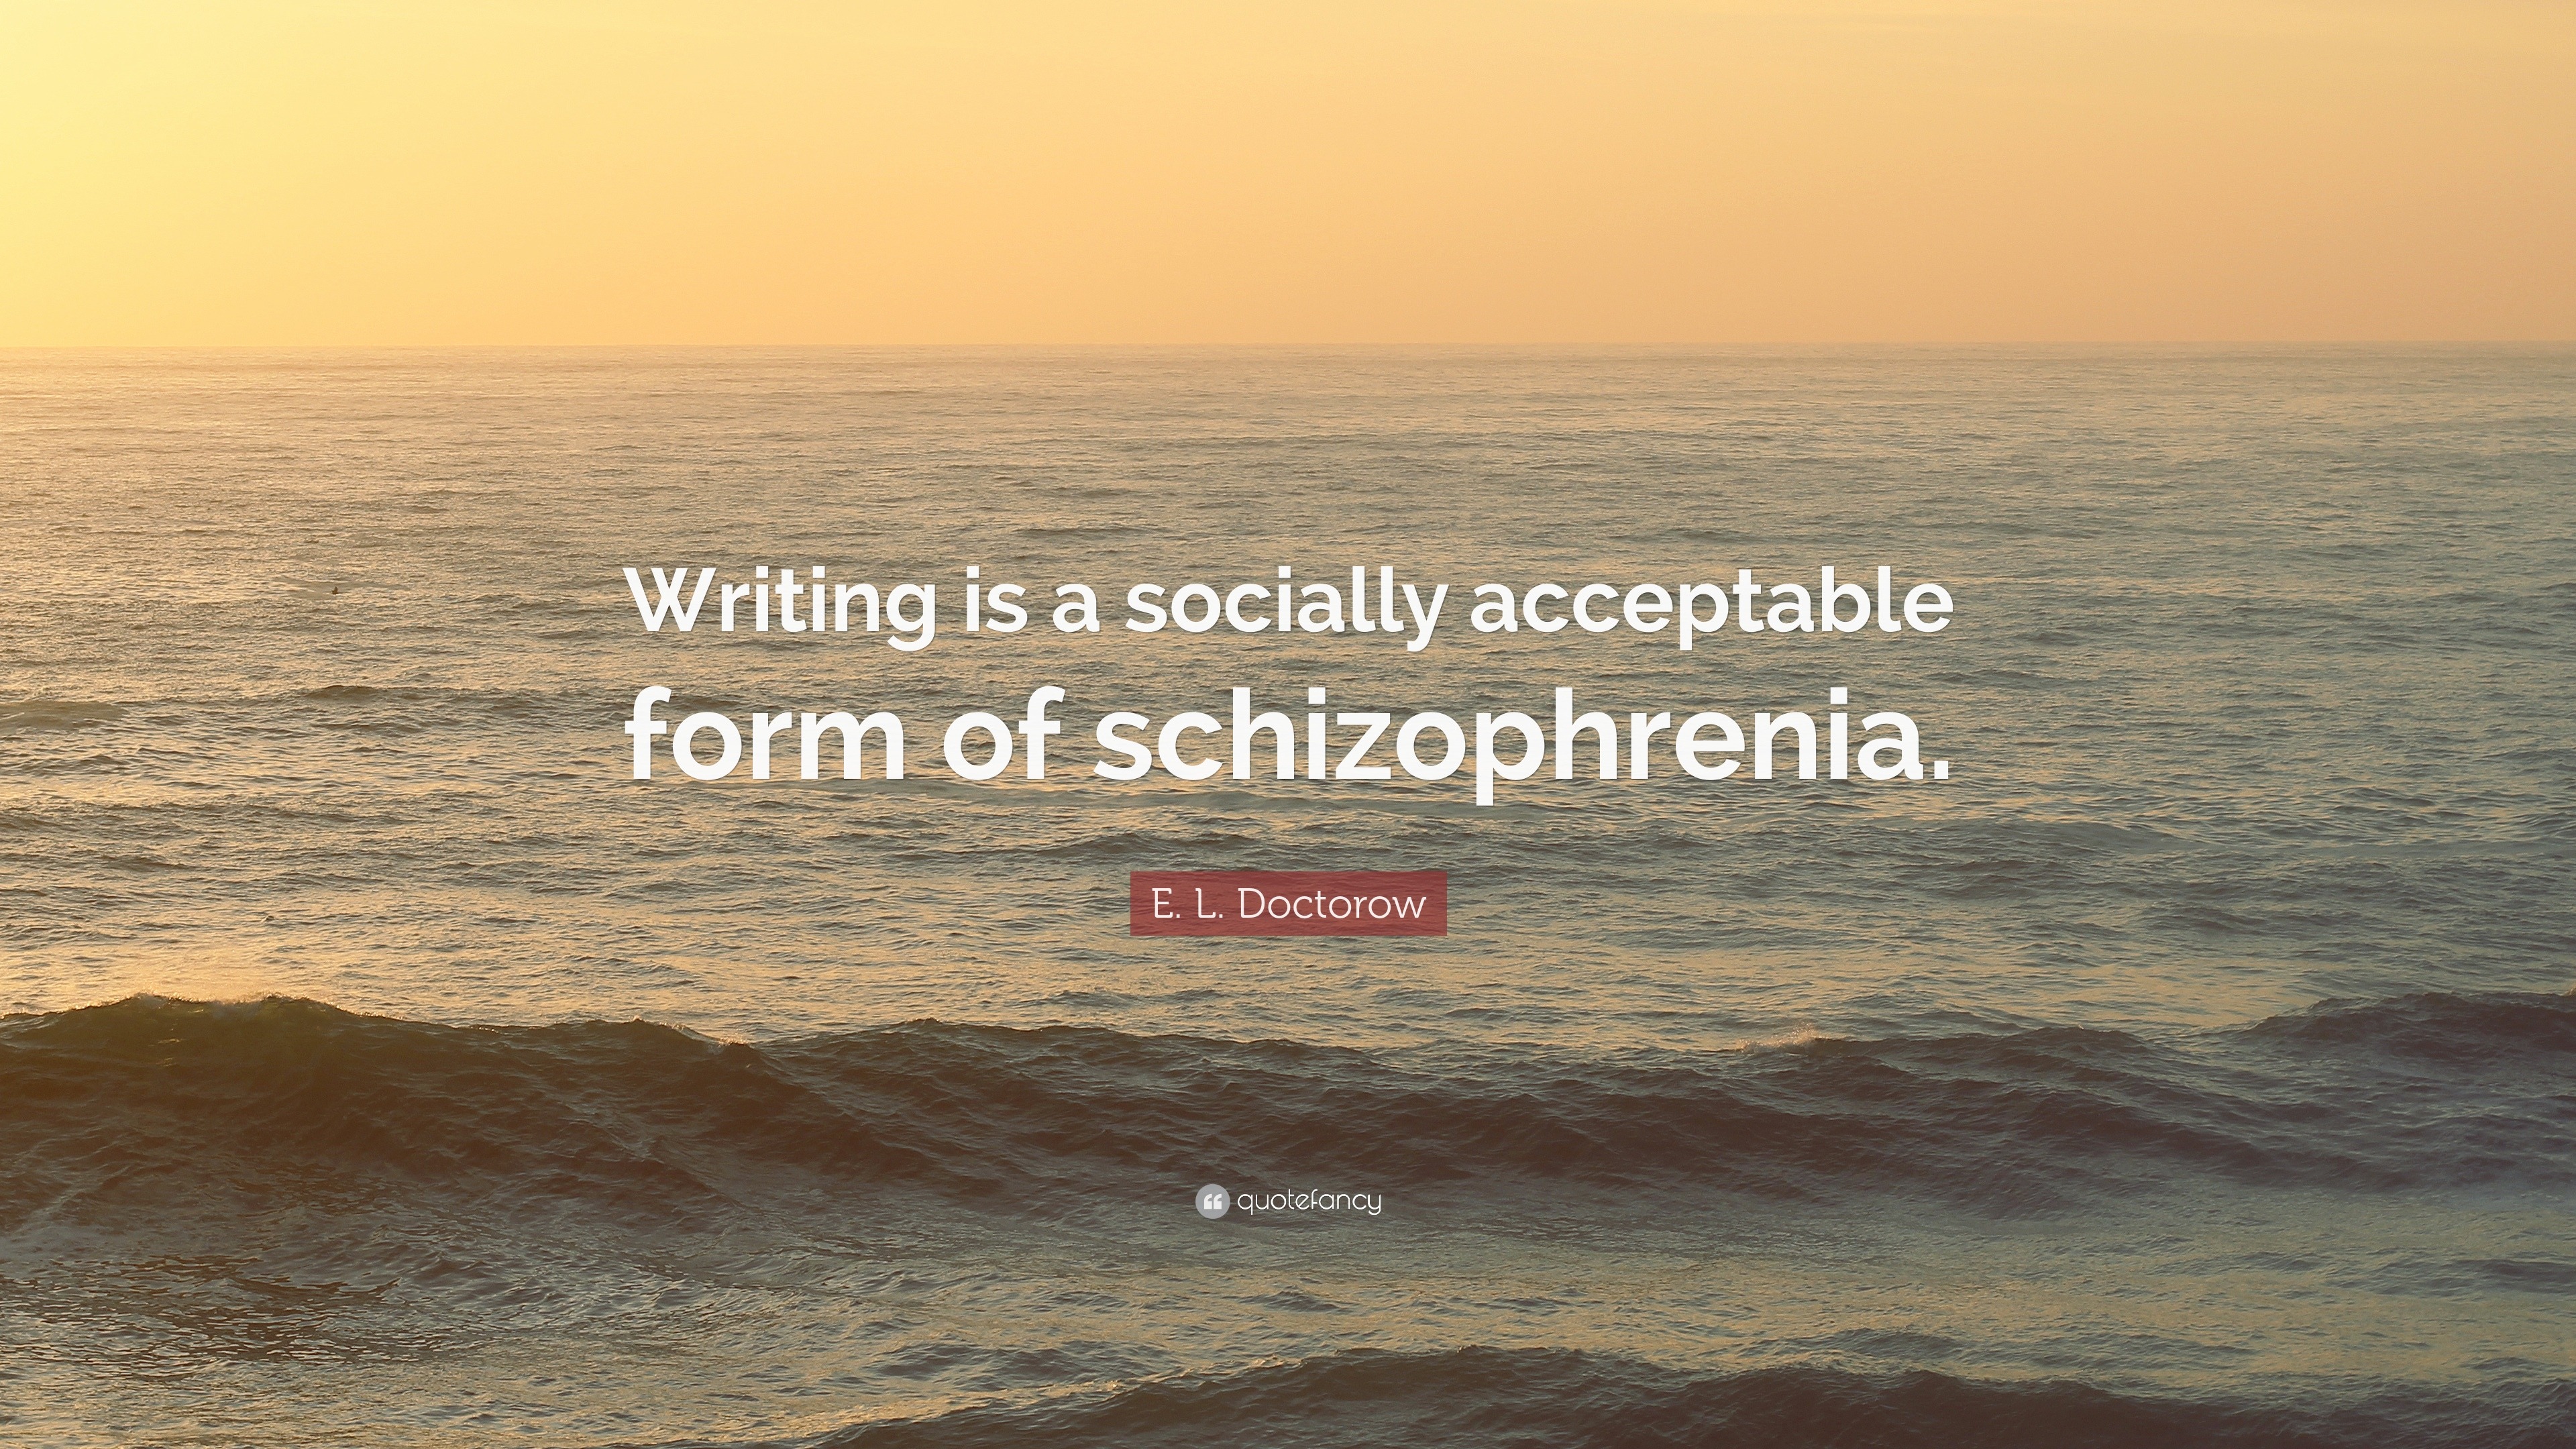 writing is a socially acceptable form of schizophrenia.